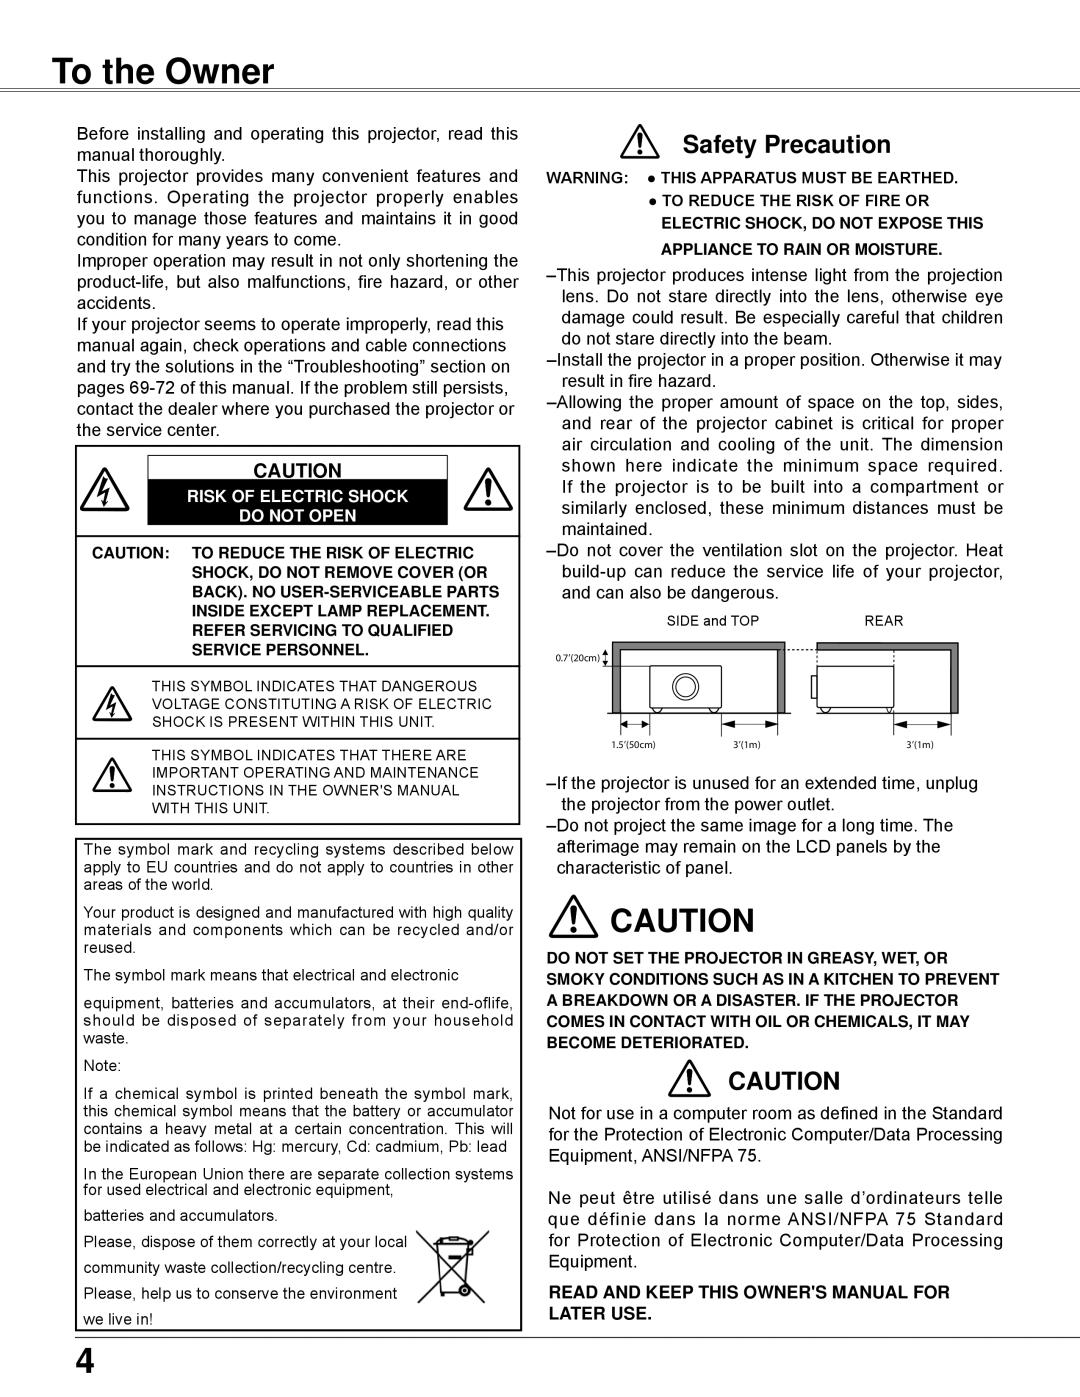 Eiki LC-WB42N owner manual To the Owner, Safety Precaution, Risk Of Electric Shock Do Not Open 